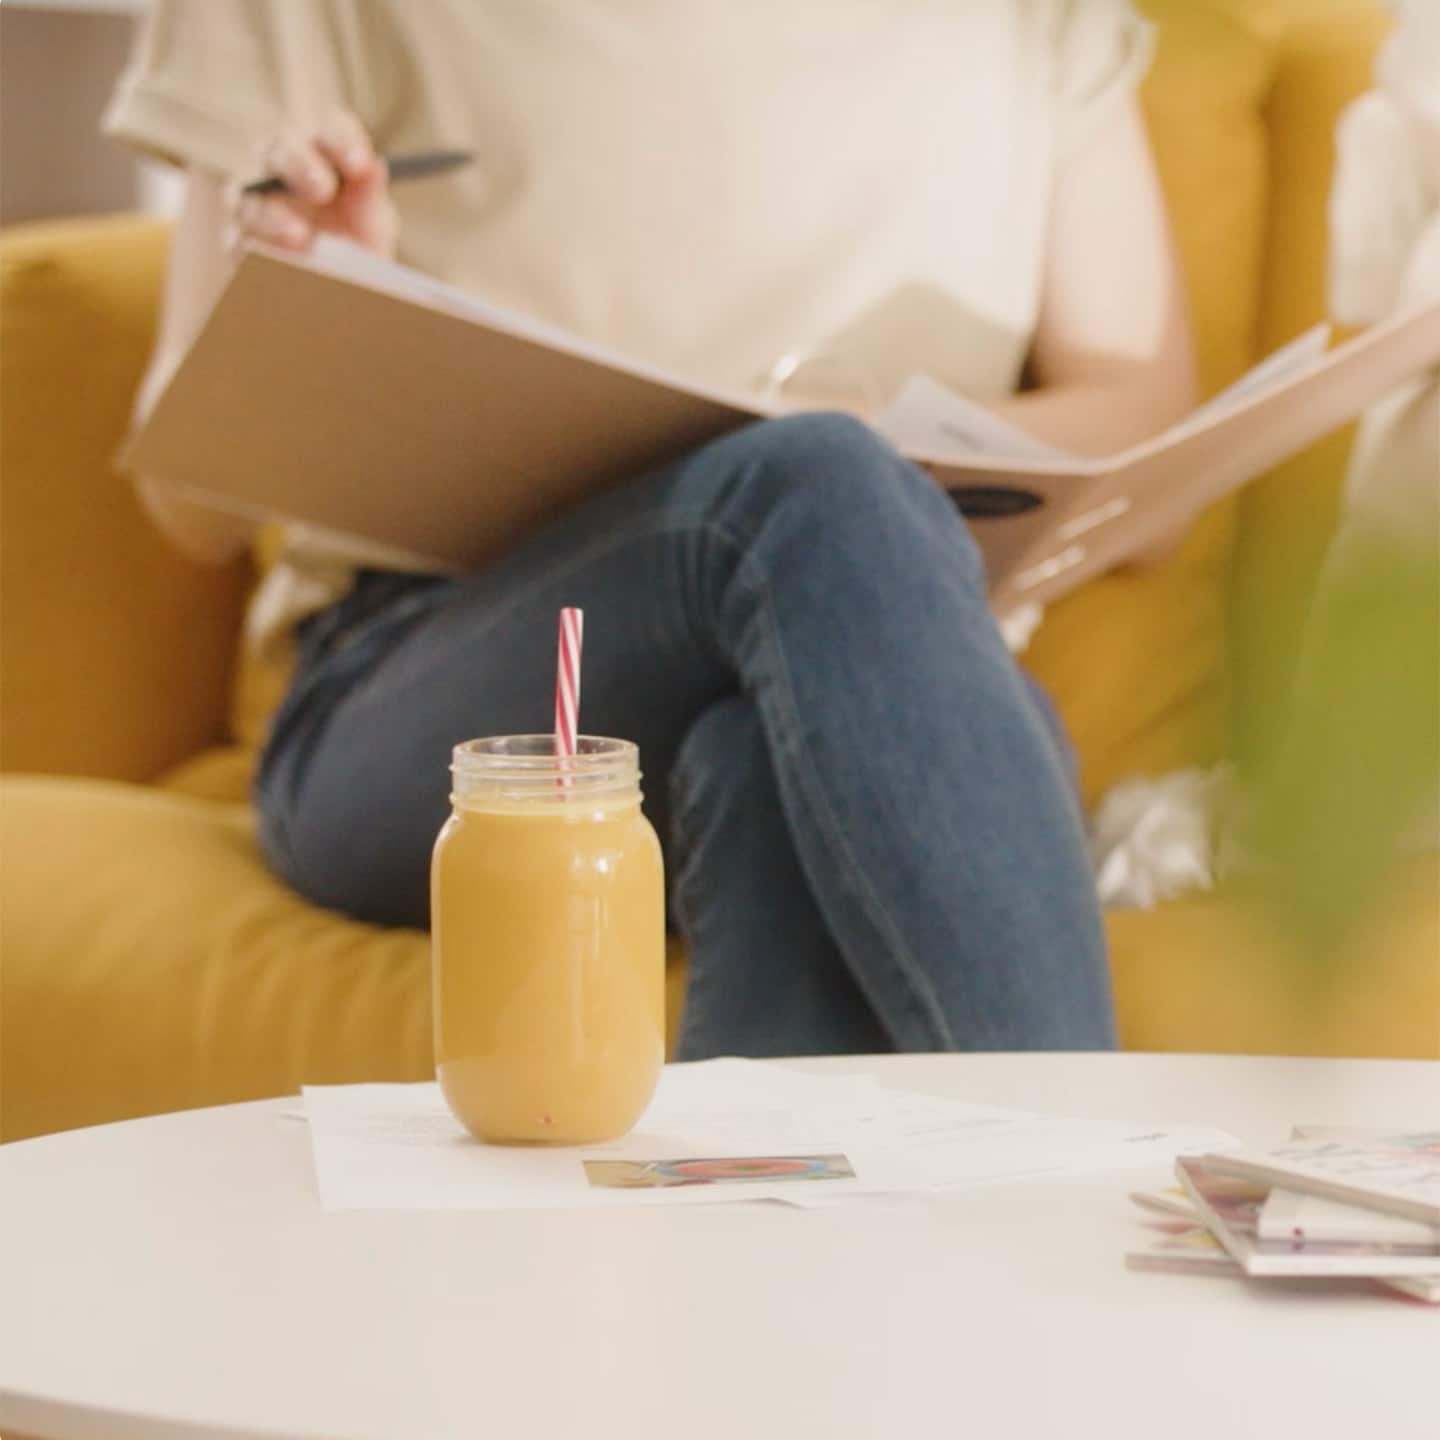 A woman sitting on a couch with a notebook and a glass of juice